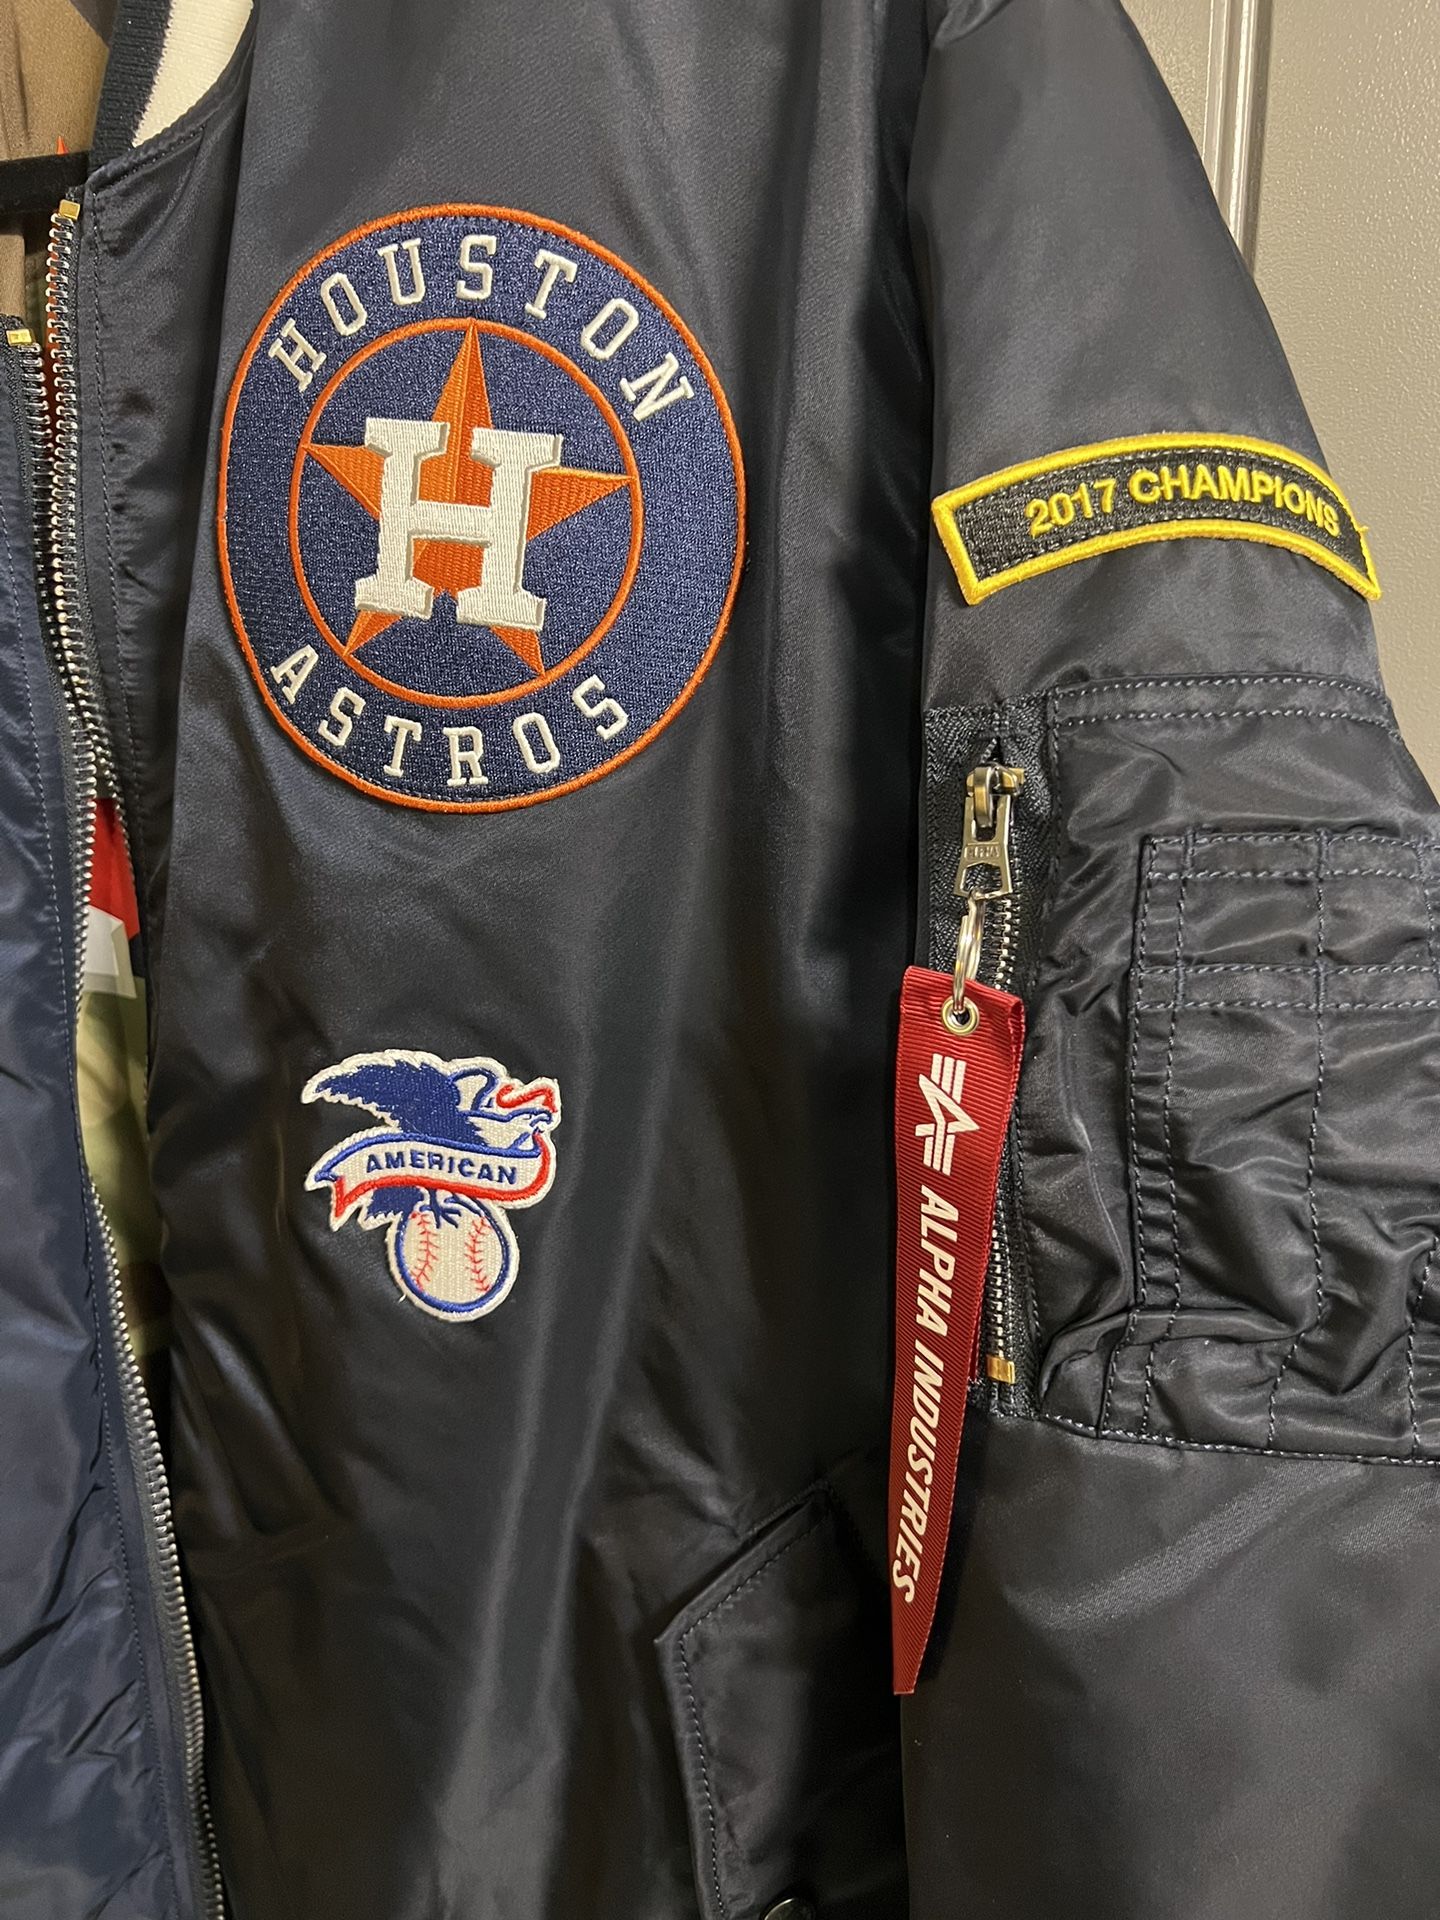 Mens Large Houston Astros Selena Jacket for Sale in Houston, TX - OfferUp